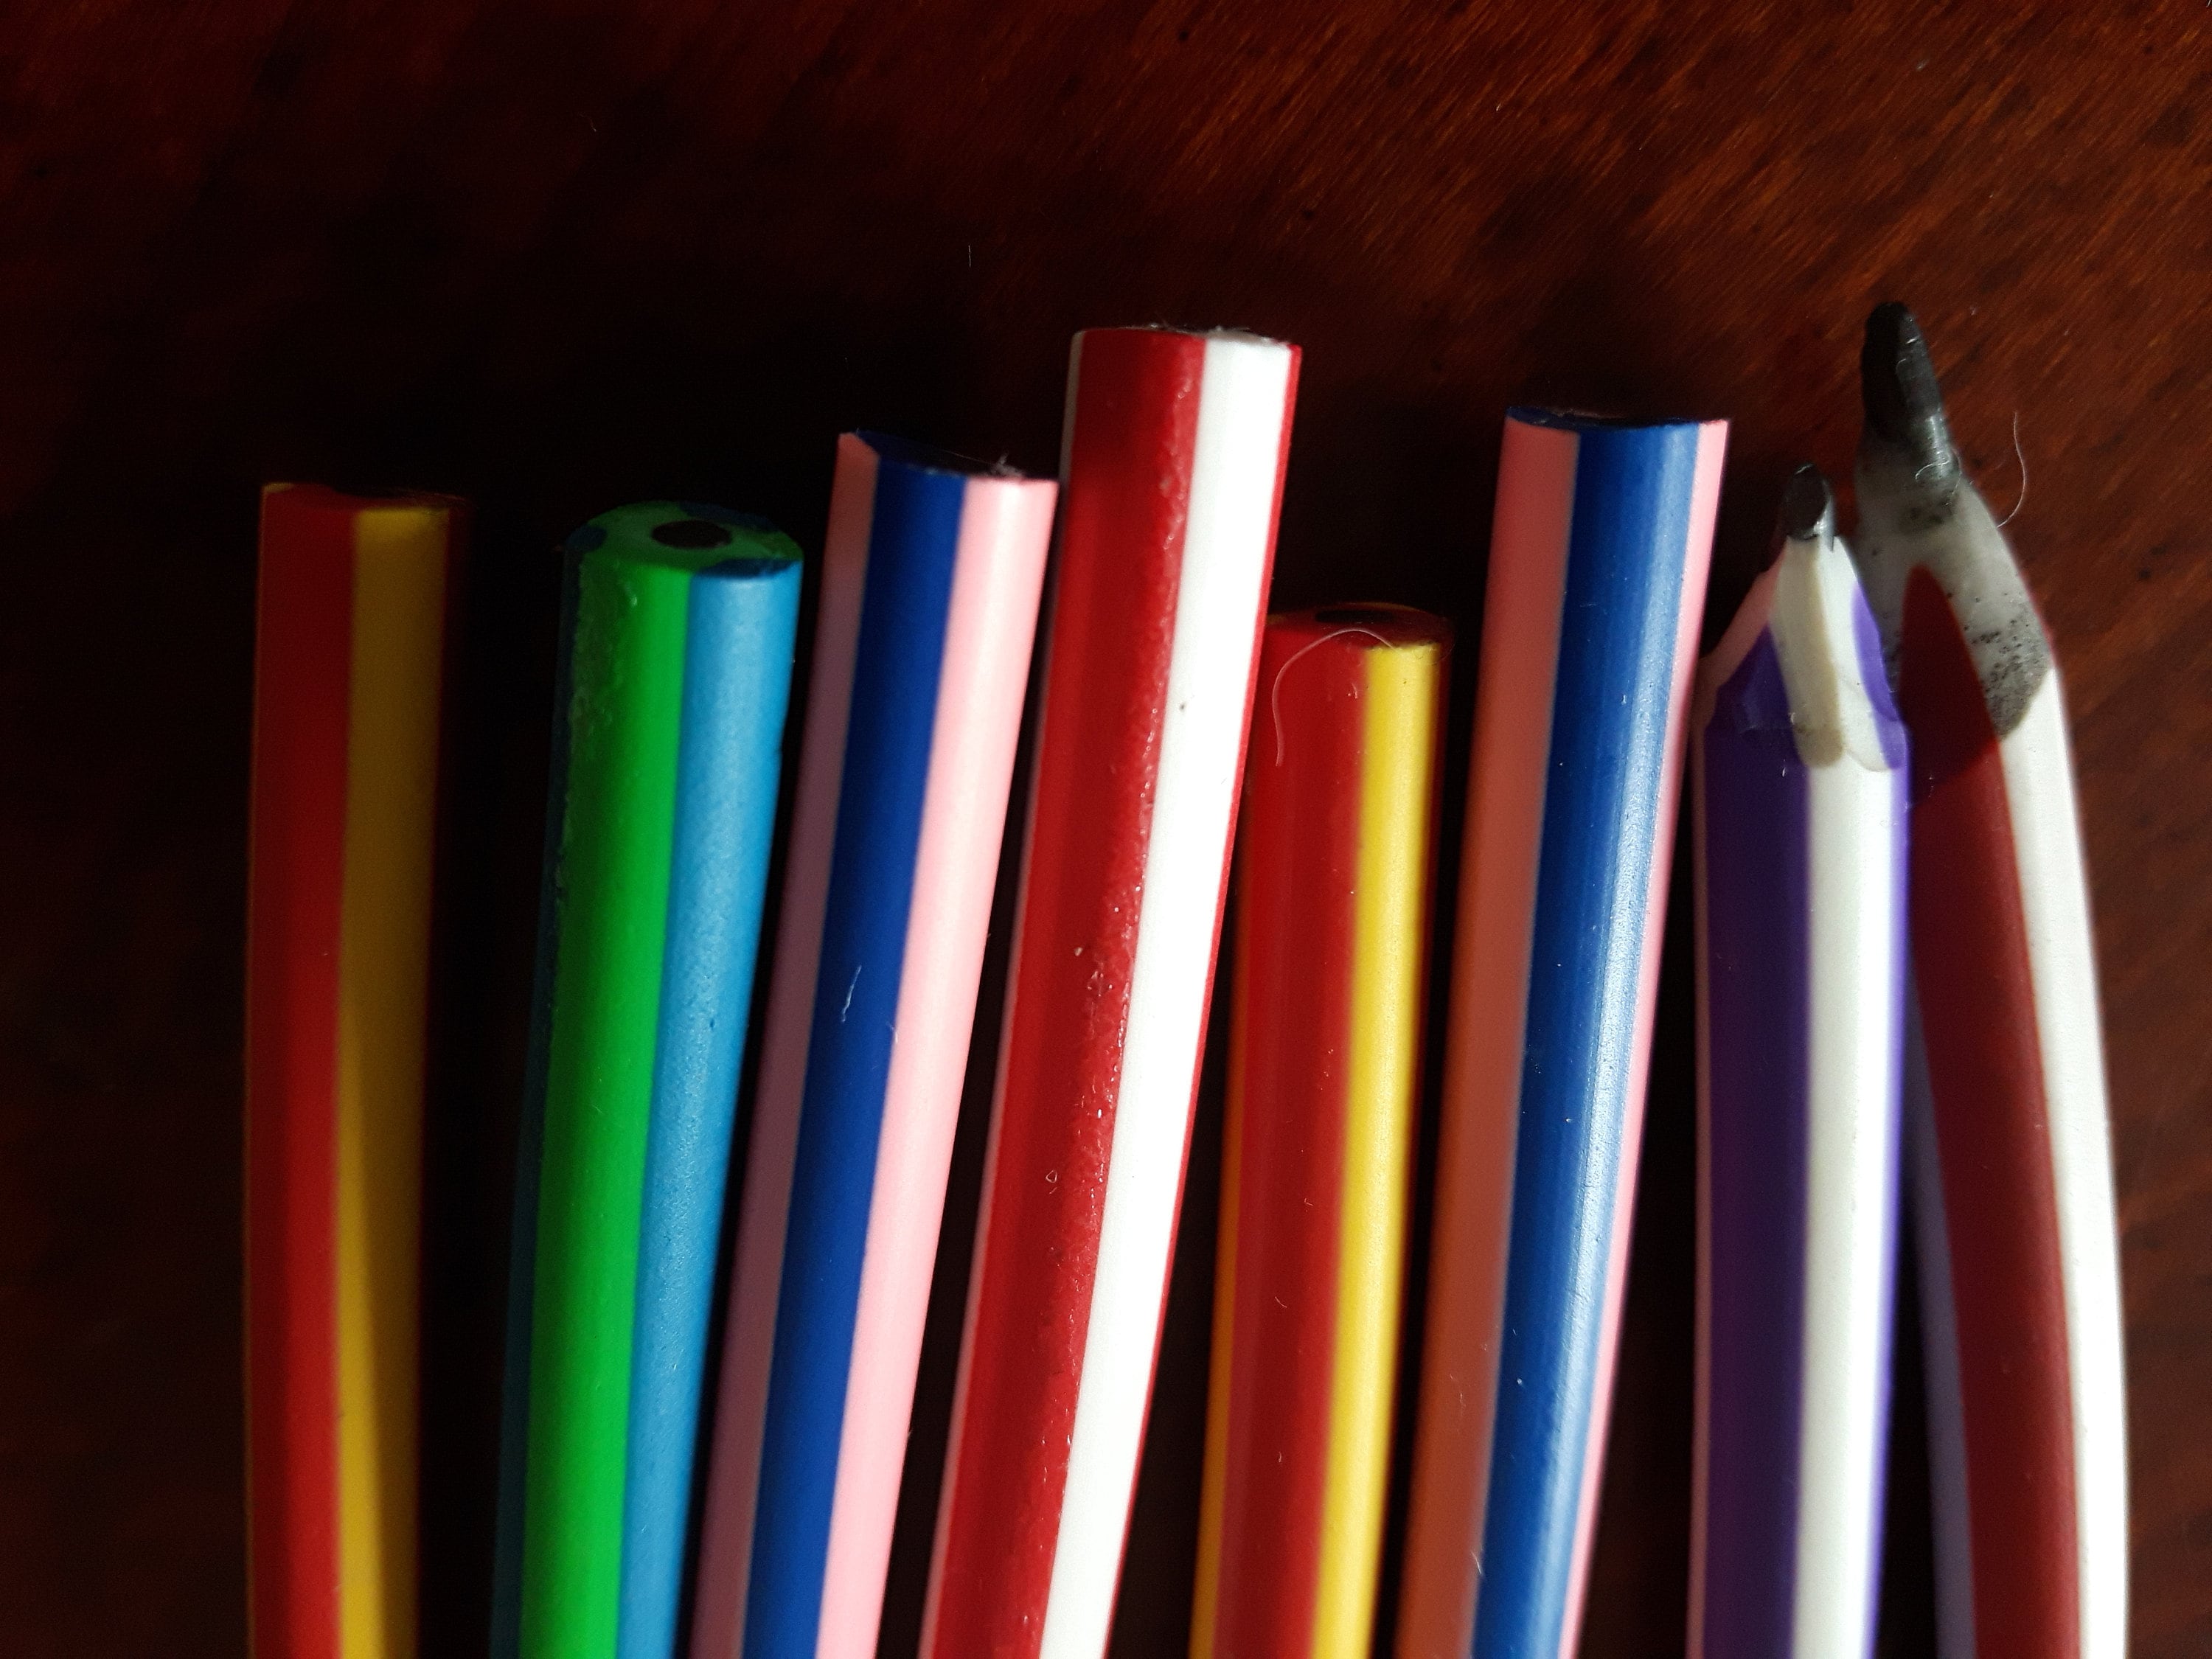 70 Bendy Pencils - Gadgets and Gift Ideas